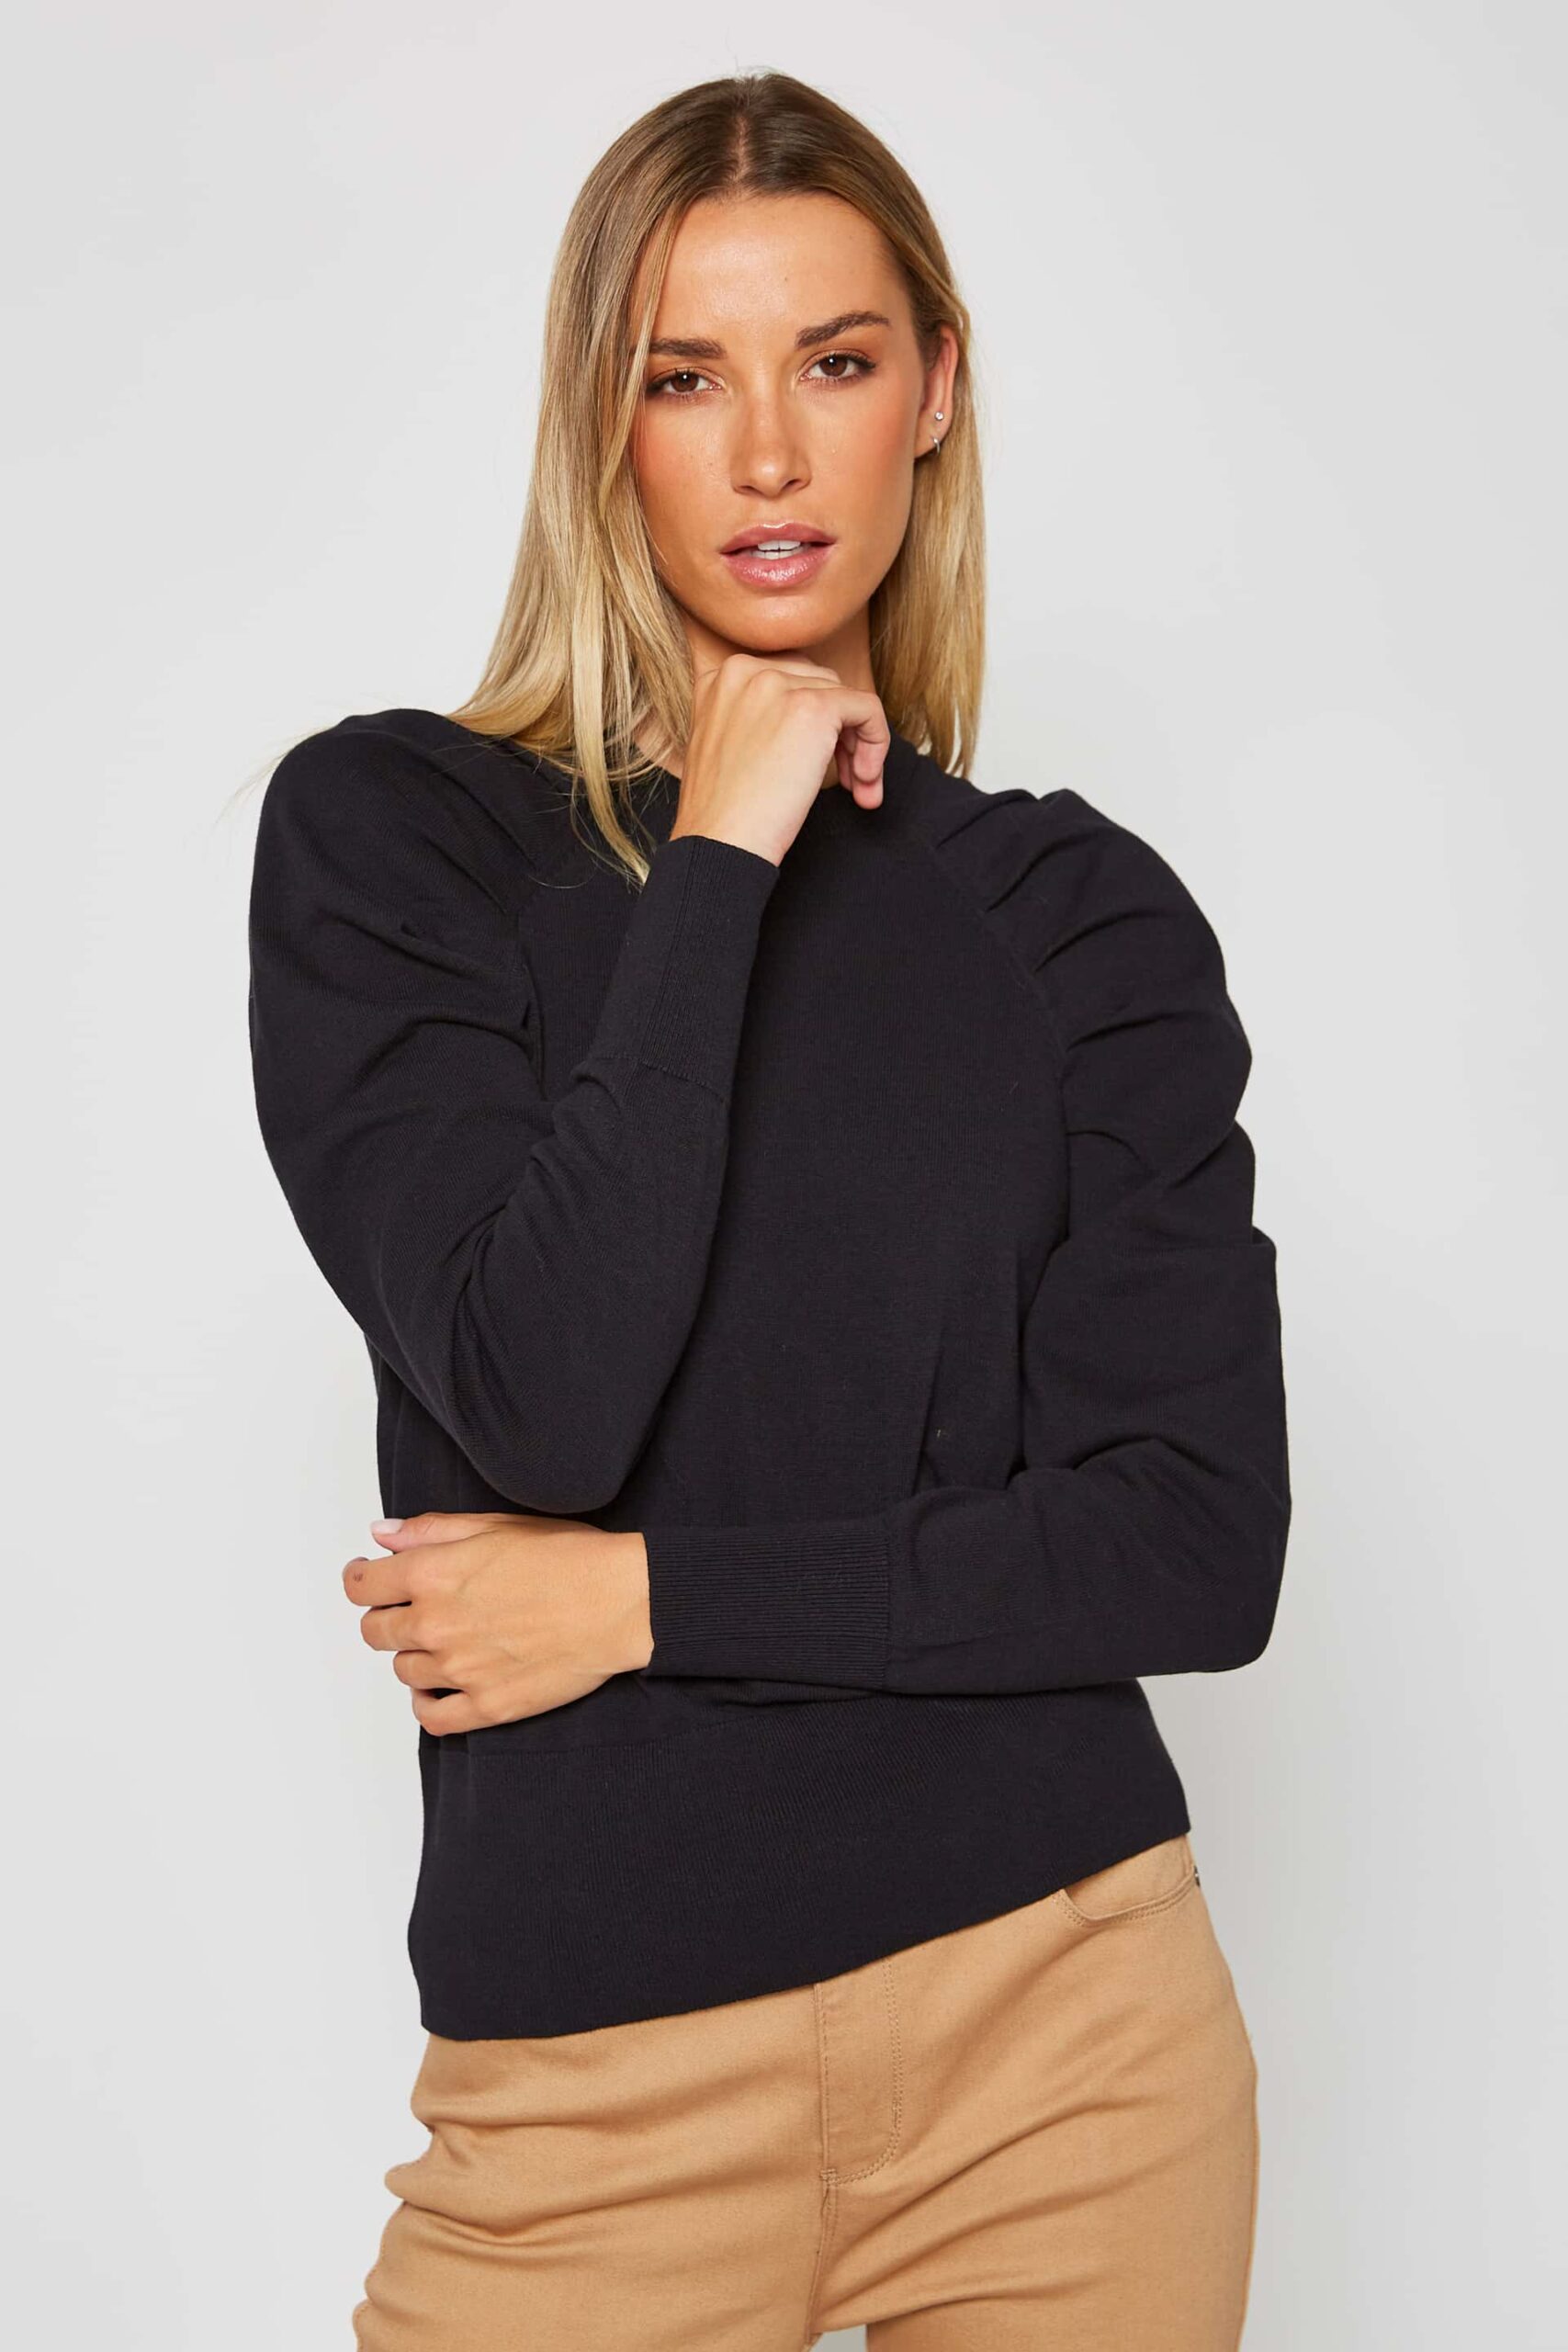 Sweater with pleats